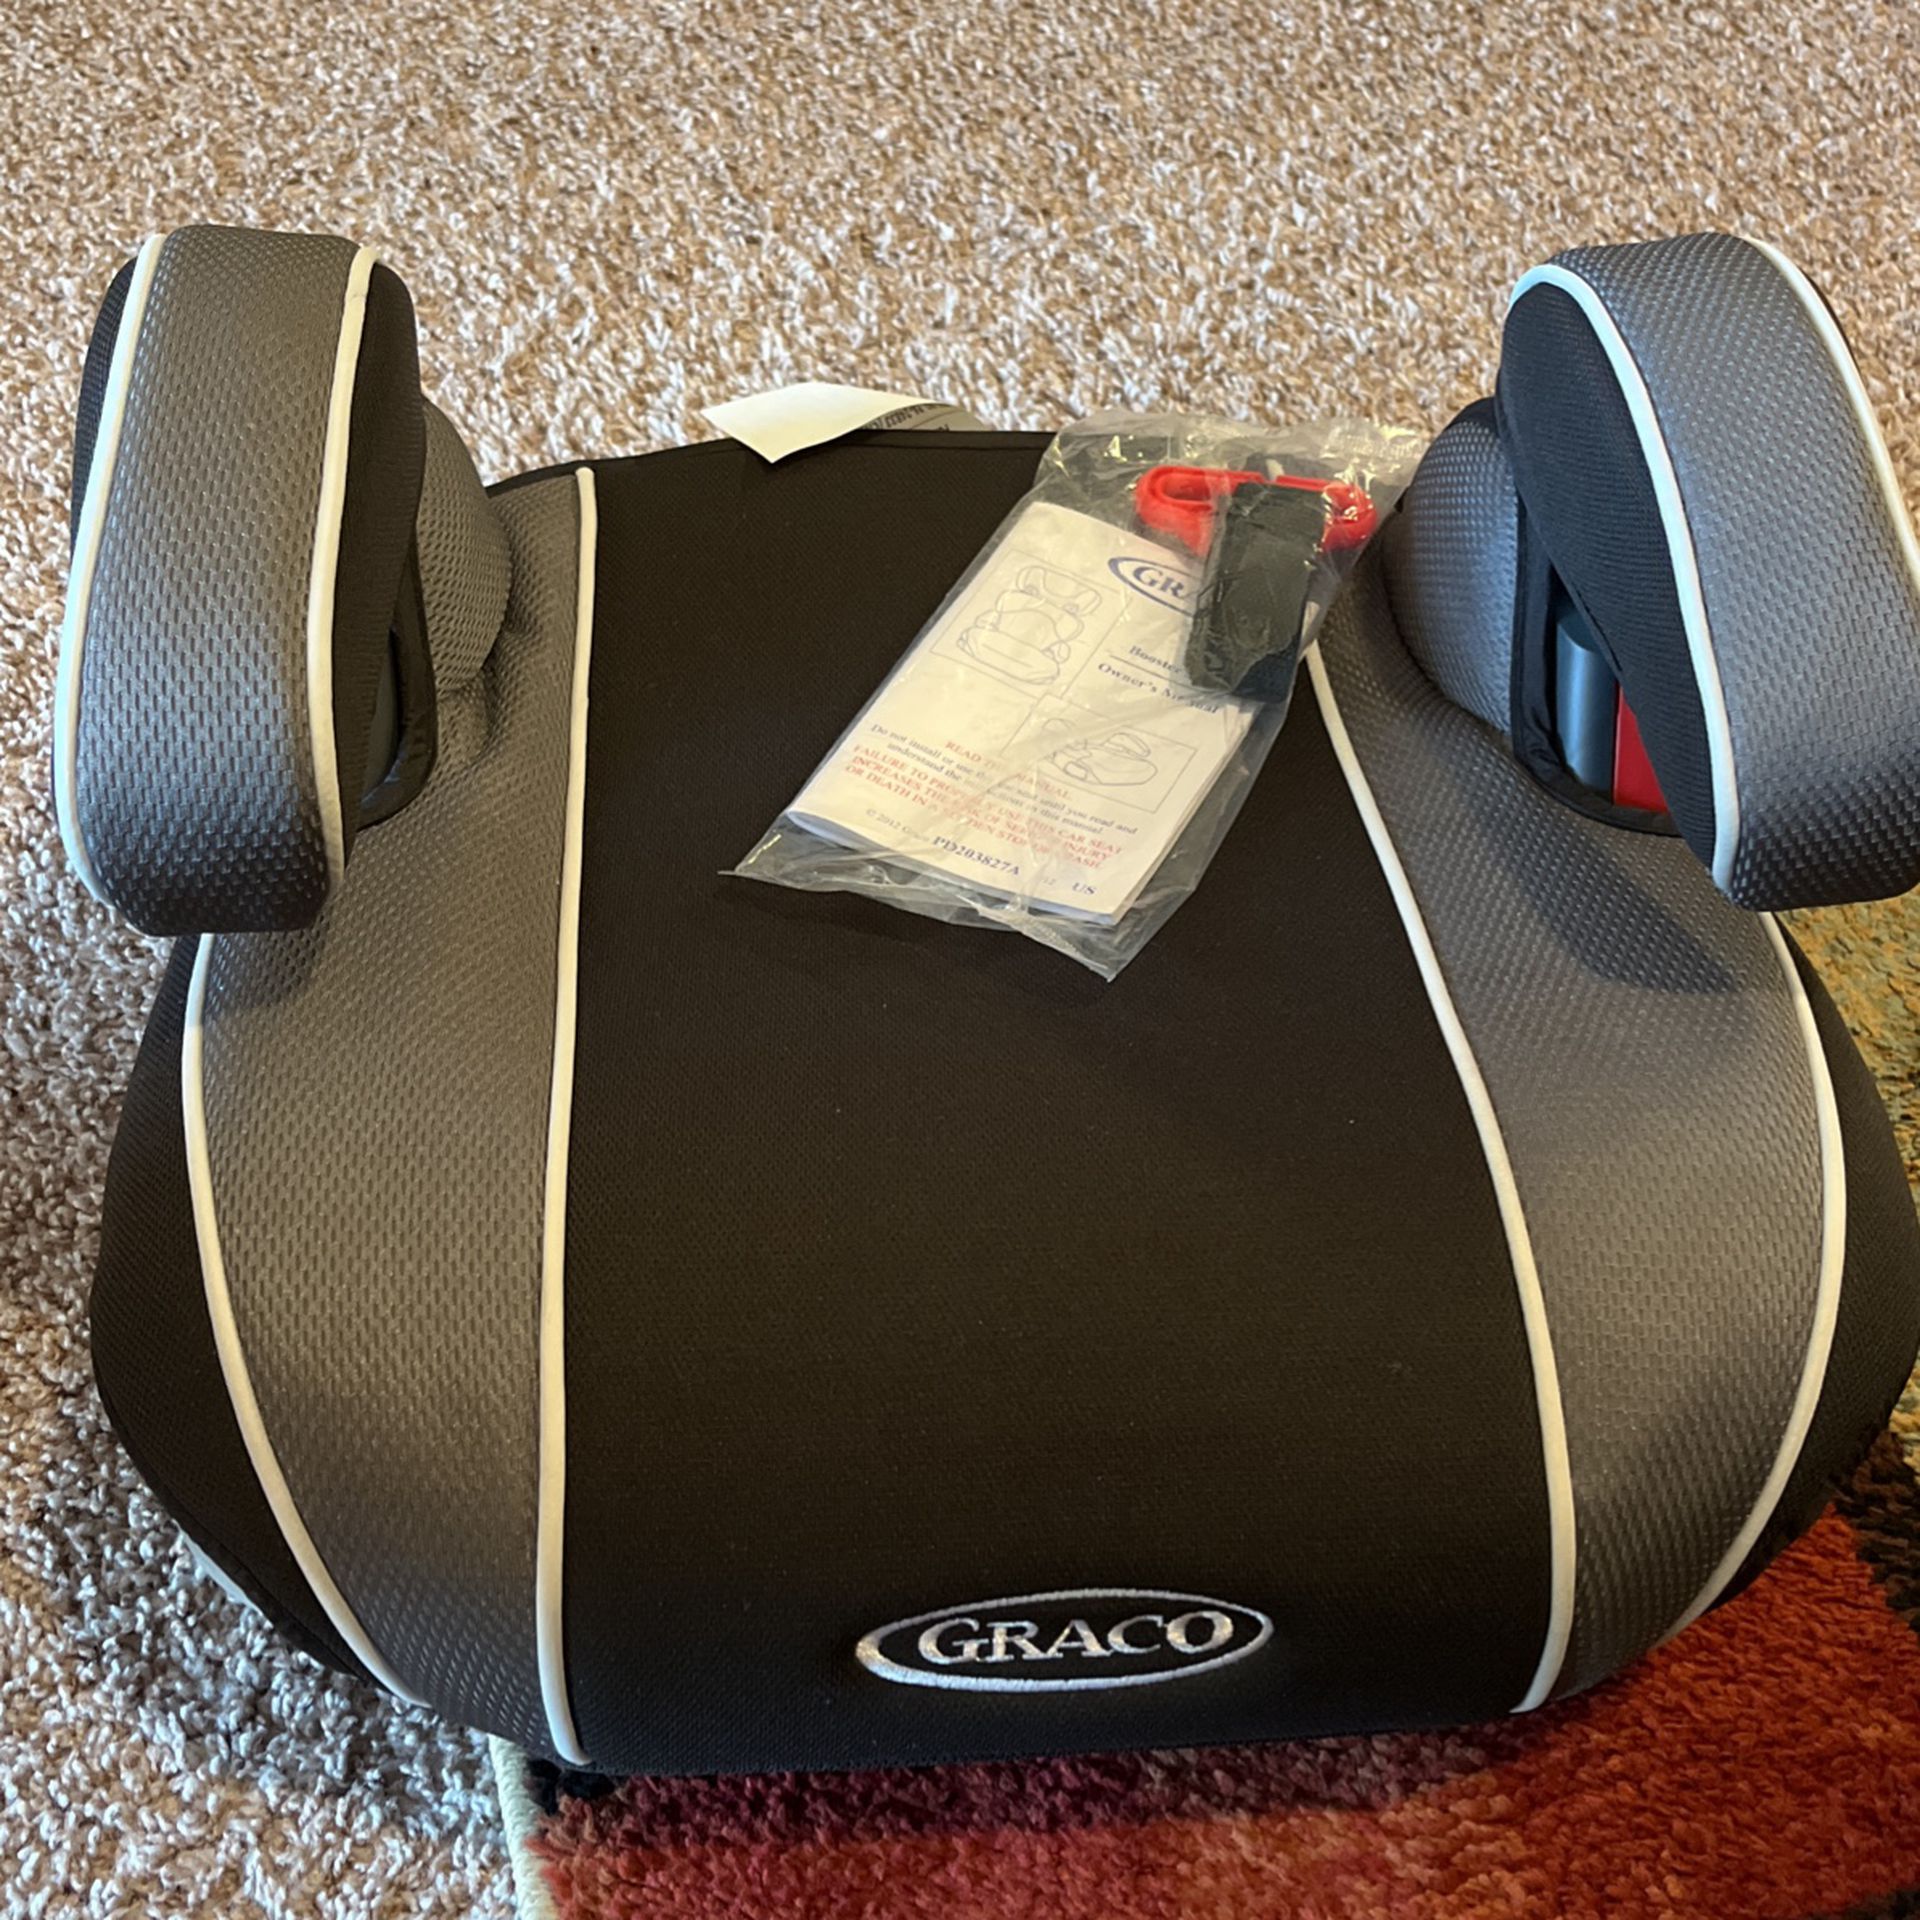 New Graco Car Booster Seat